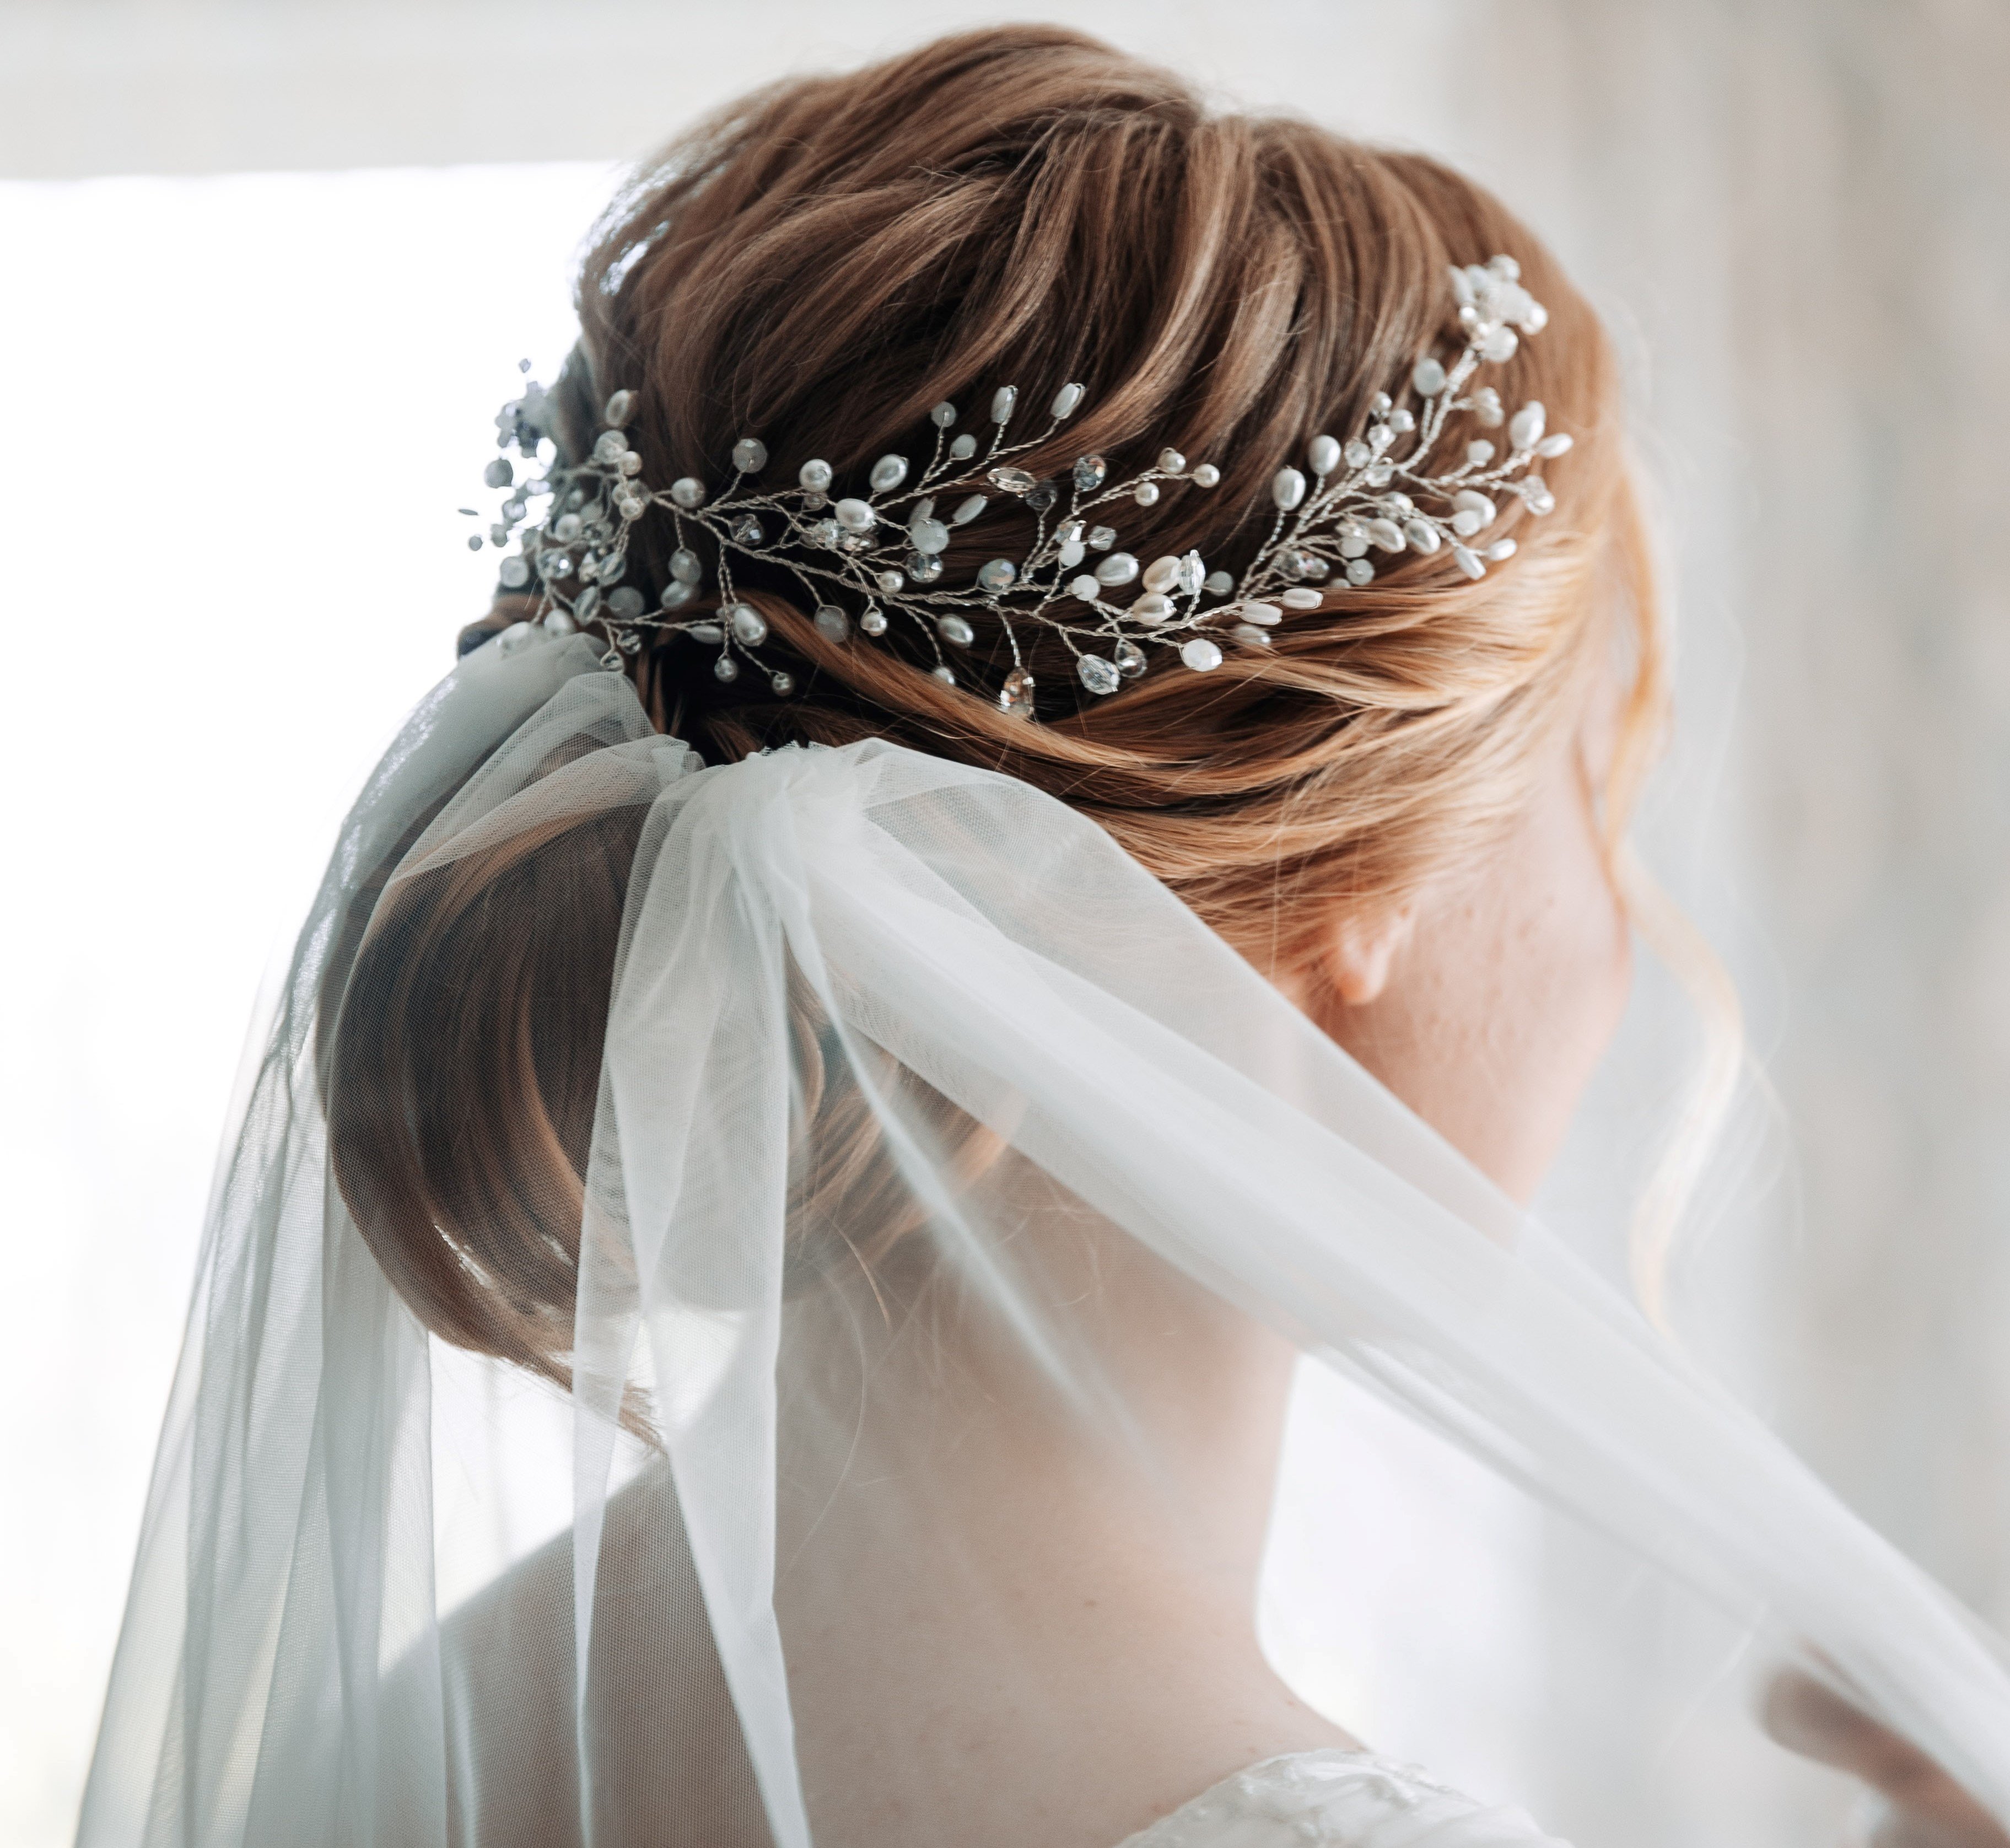 Simon was excited to see his daughter in her wedding dress. | Source: Unsplash